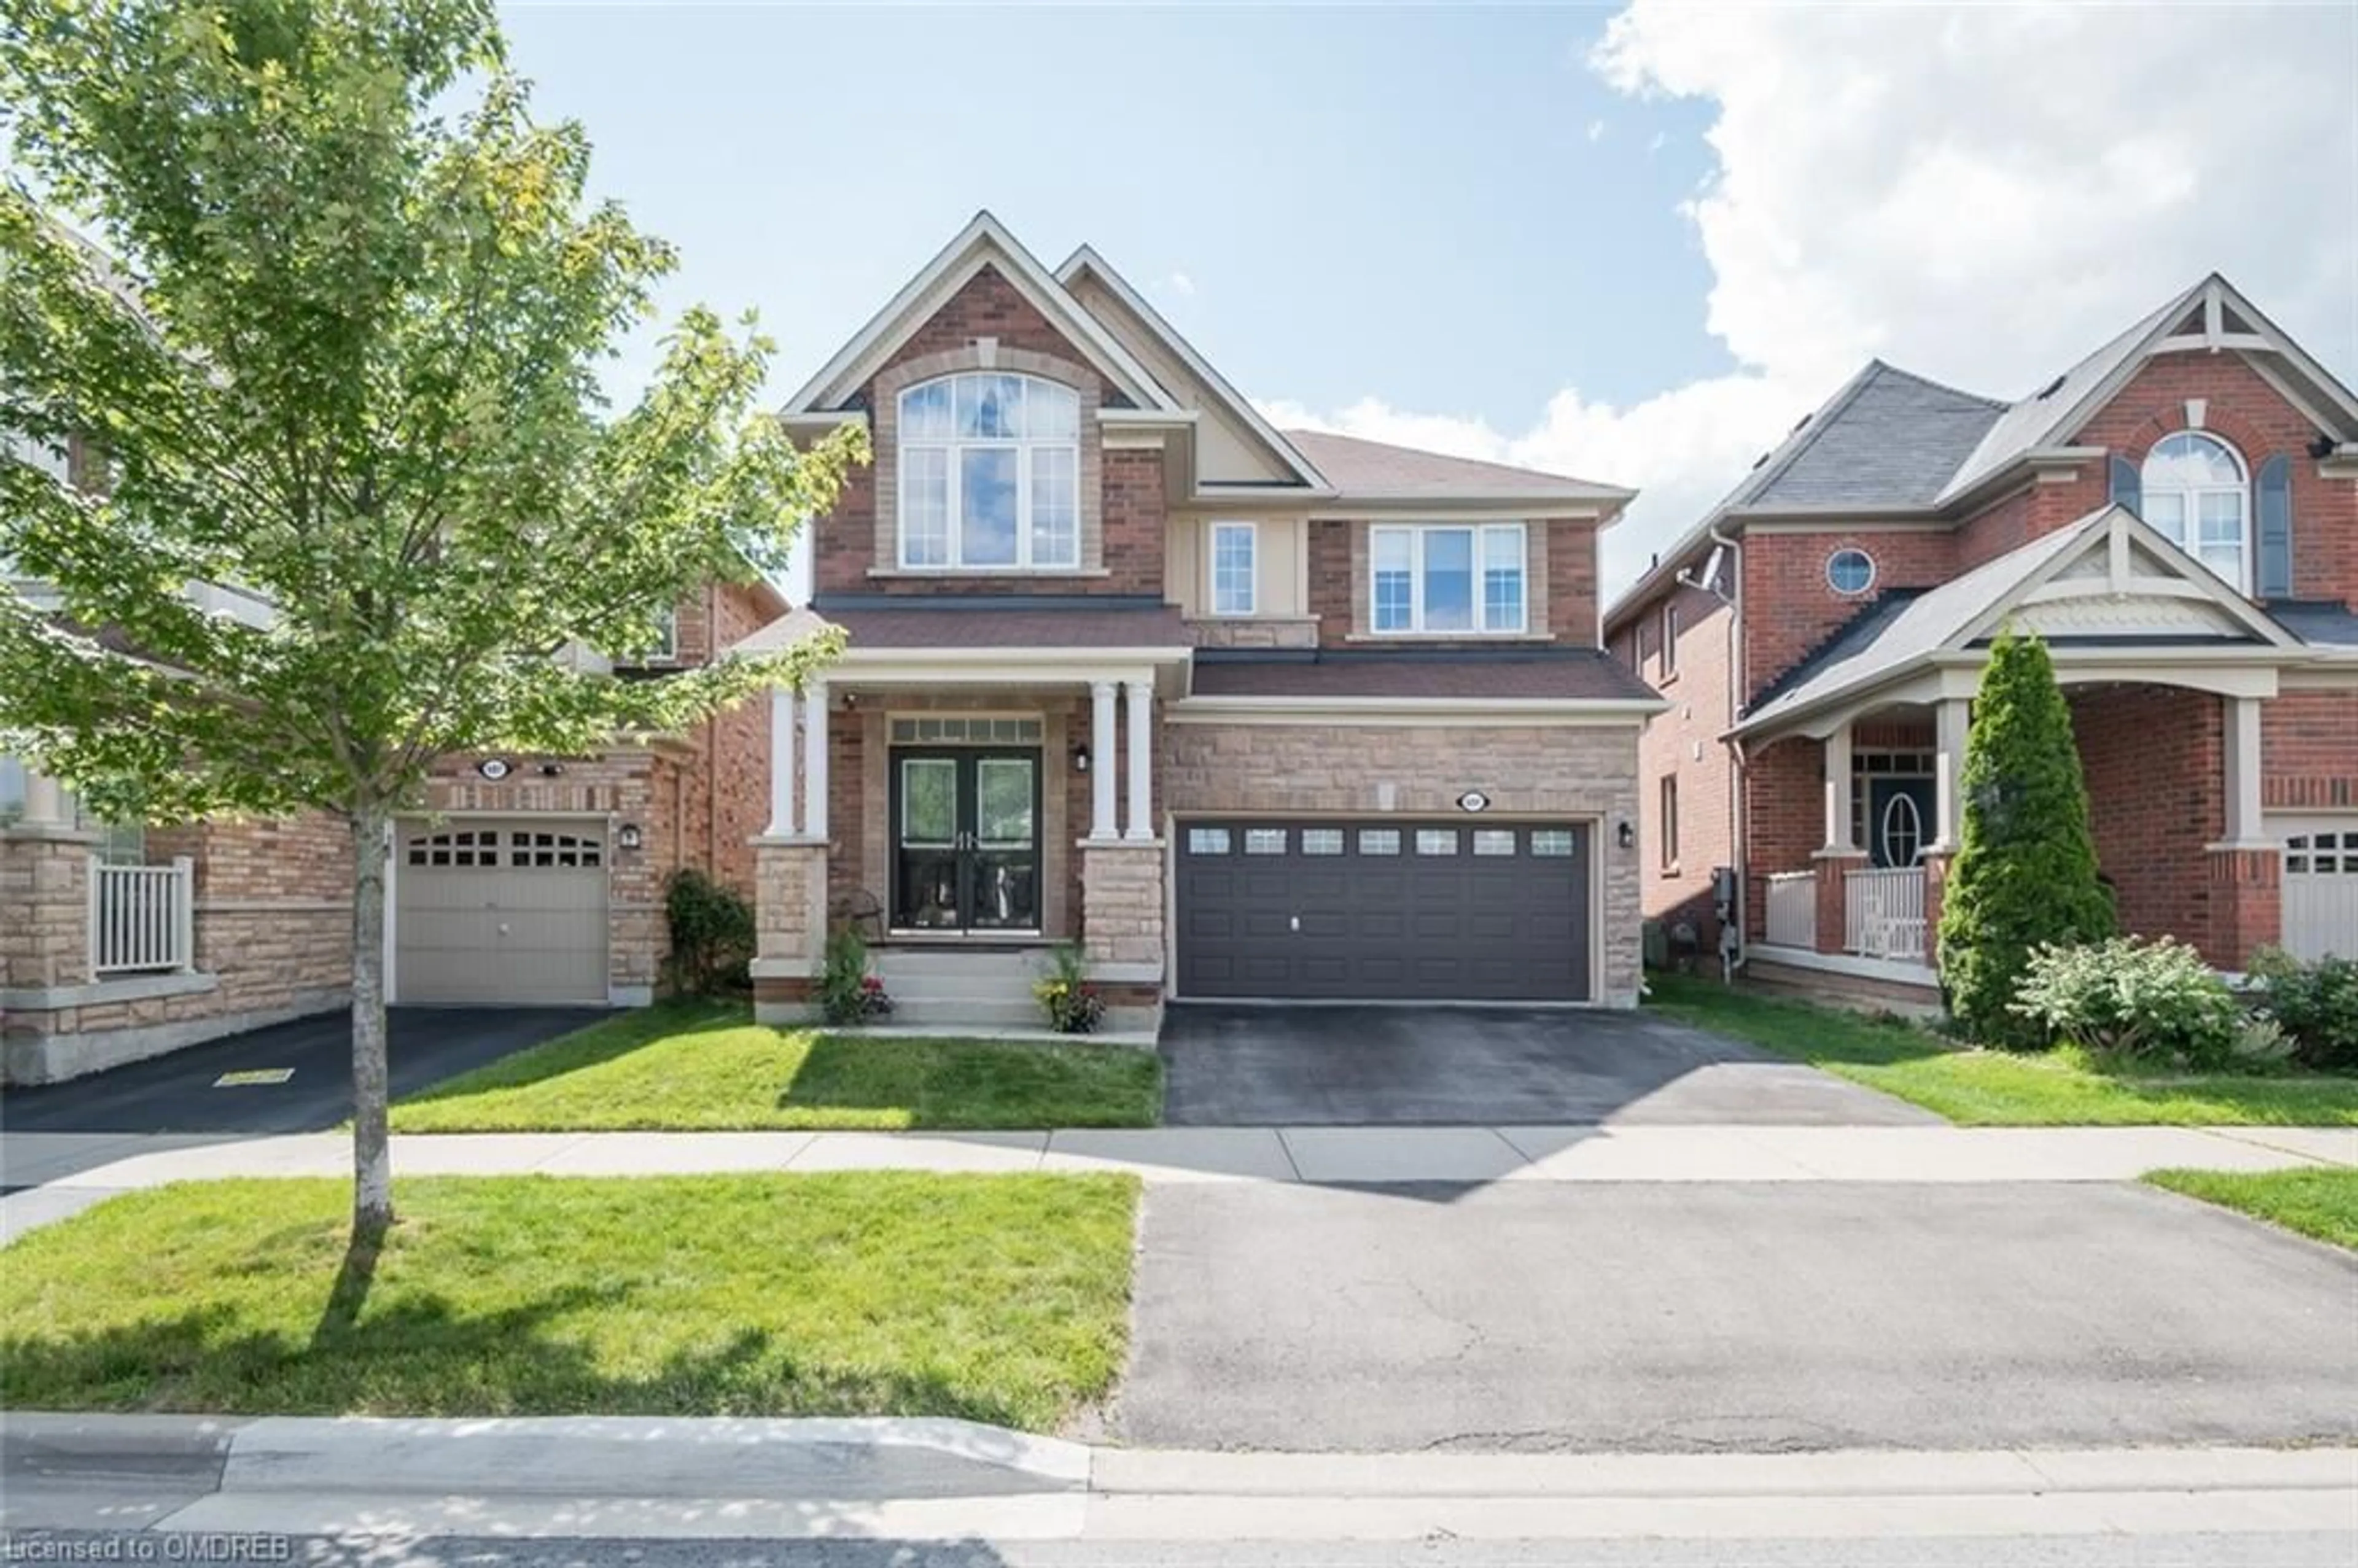 Home with brick exterior material for 691 Yates Dr, Milton Ontario L9T 7R9